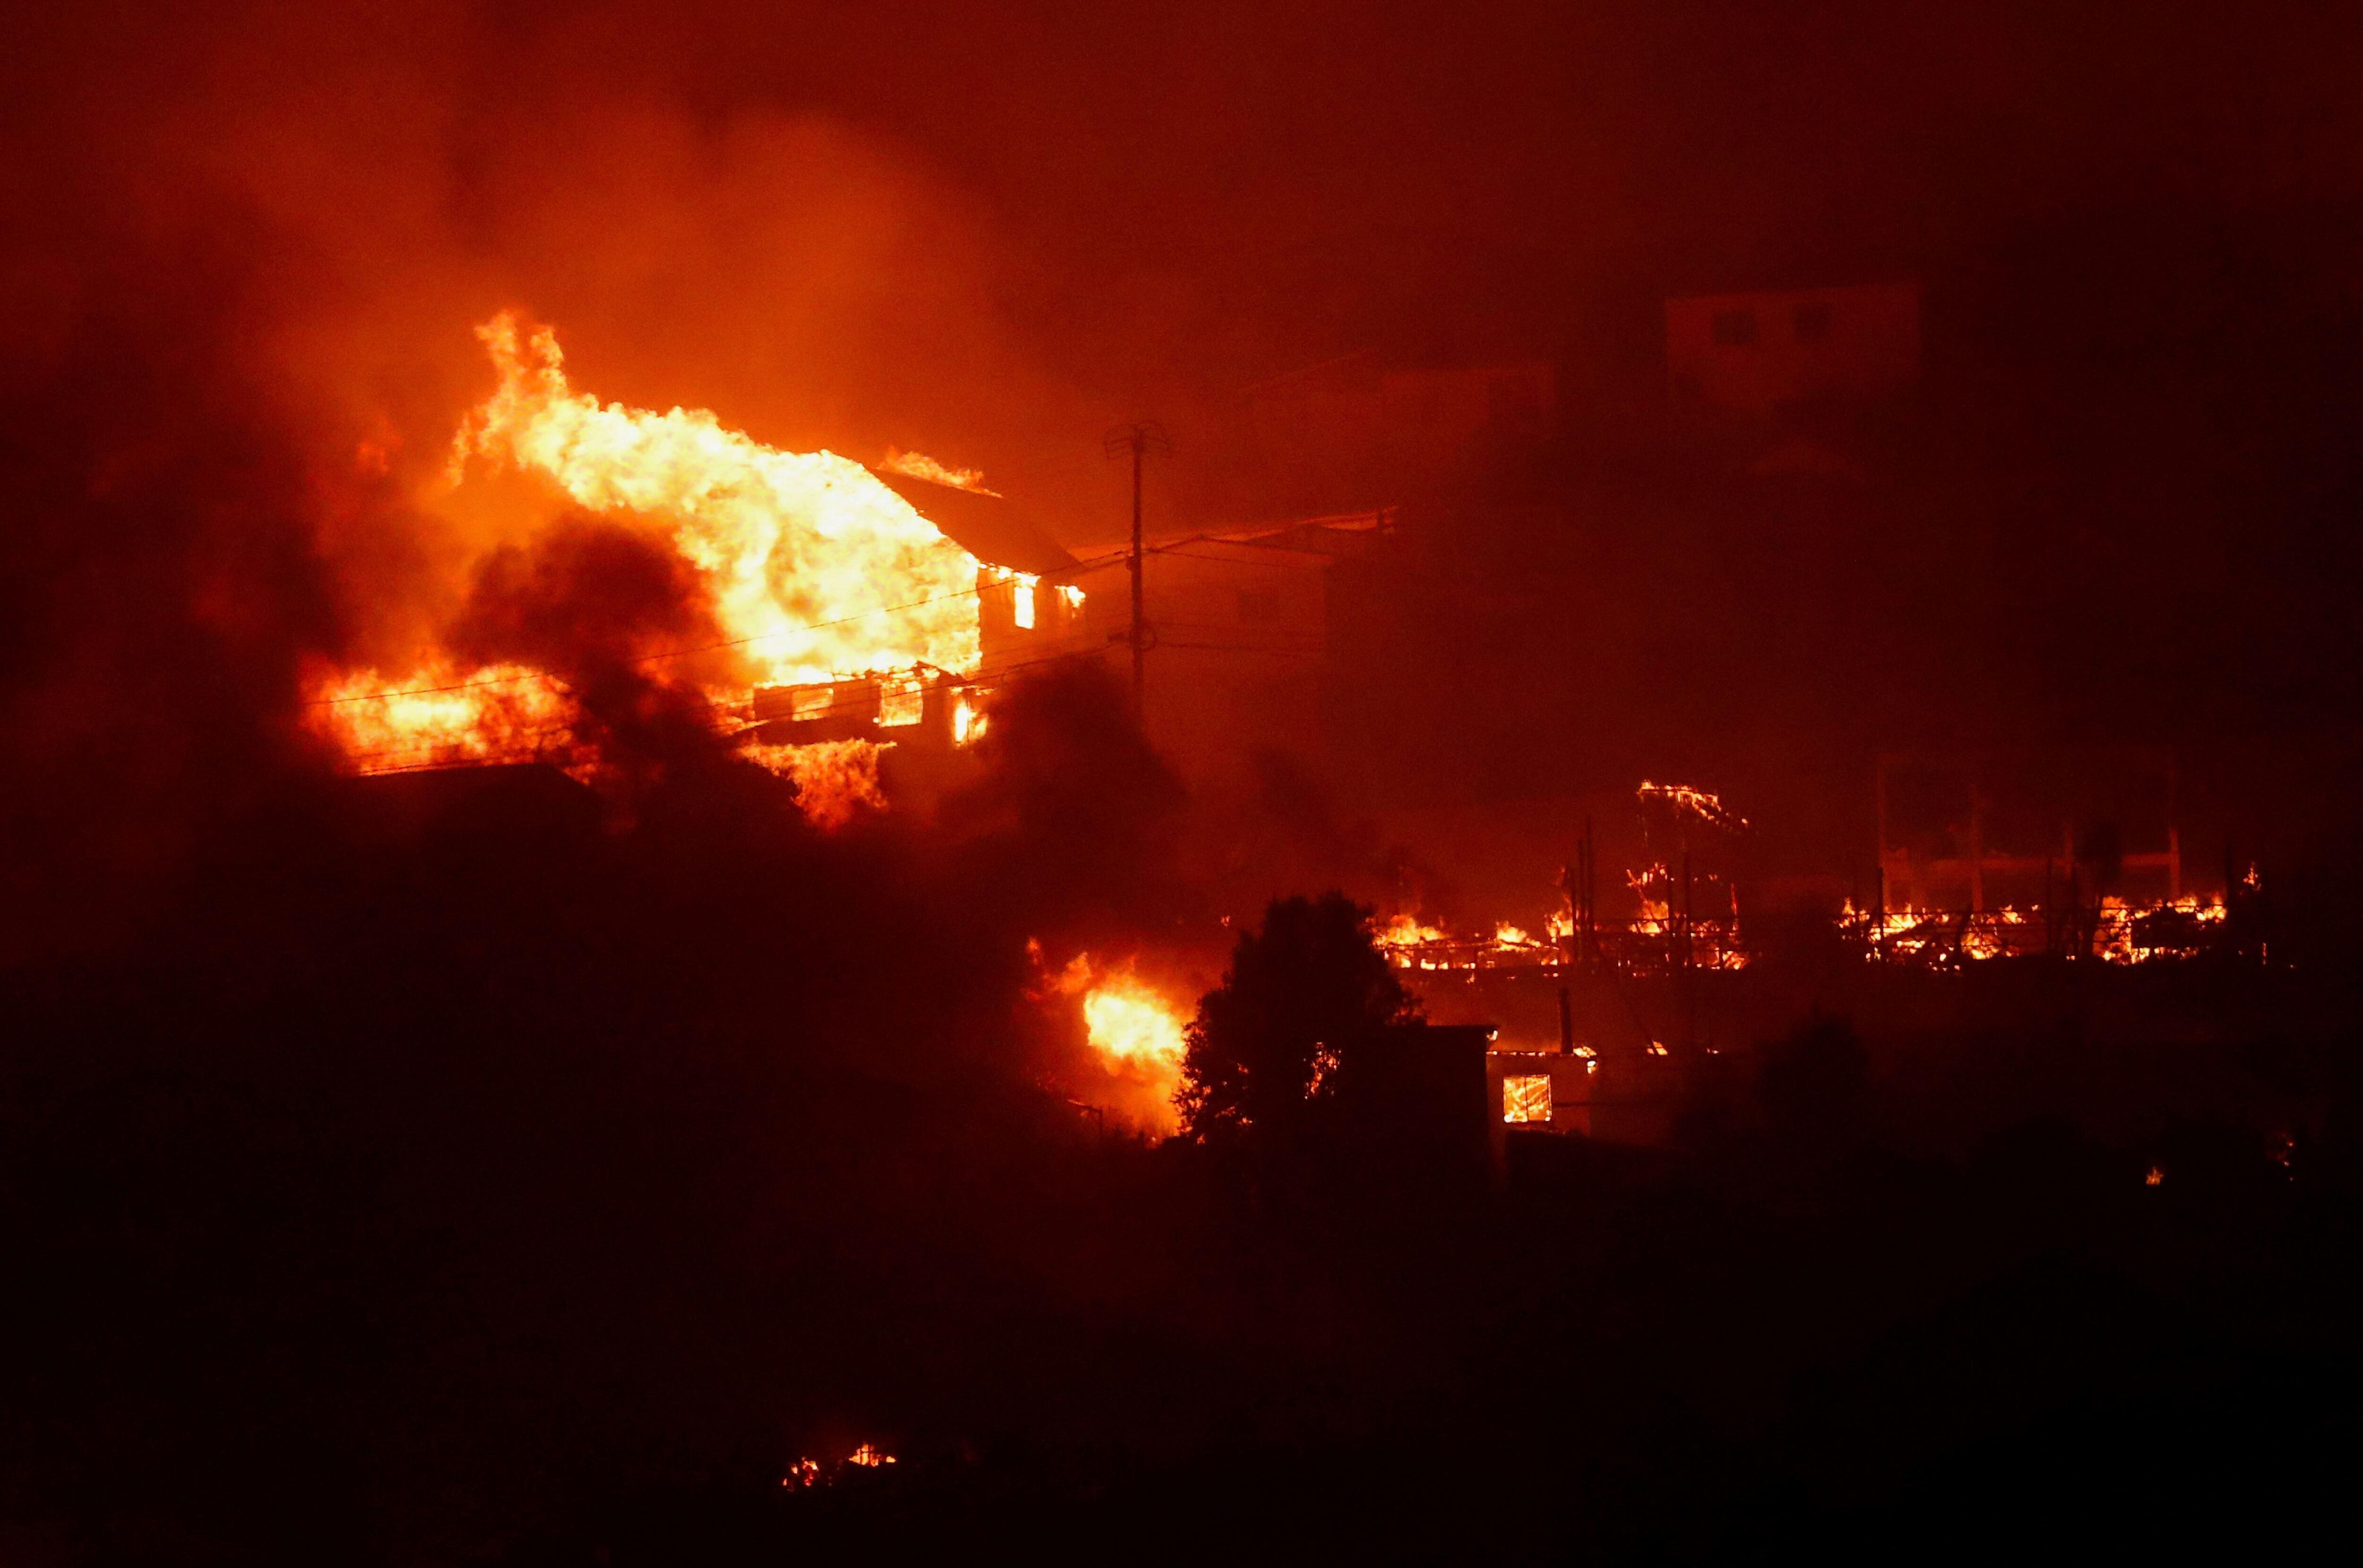 The fire hit entire neighborhoods, like this one in Viña del Mar. (REUTERS).